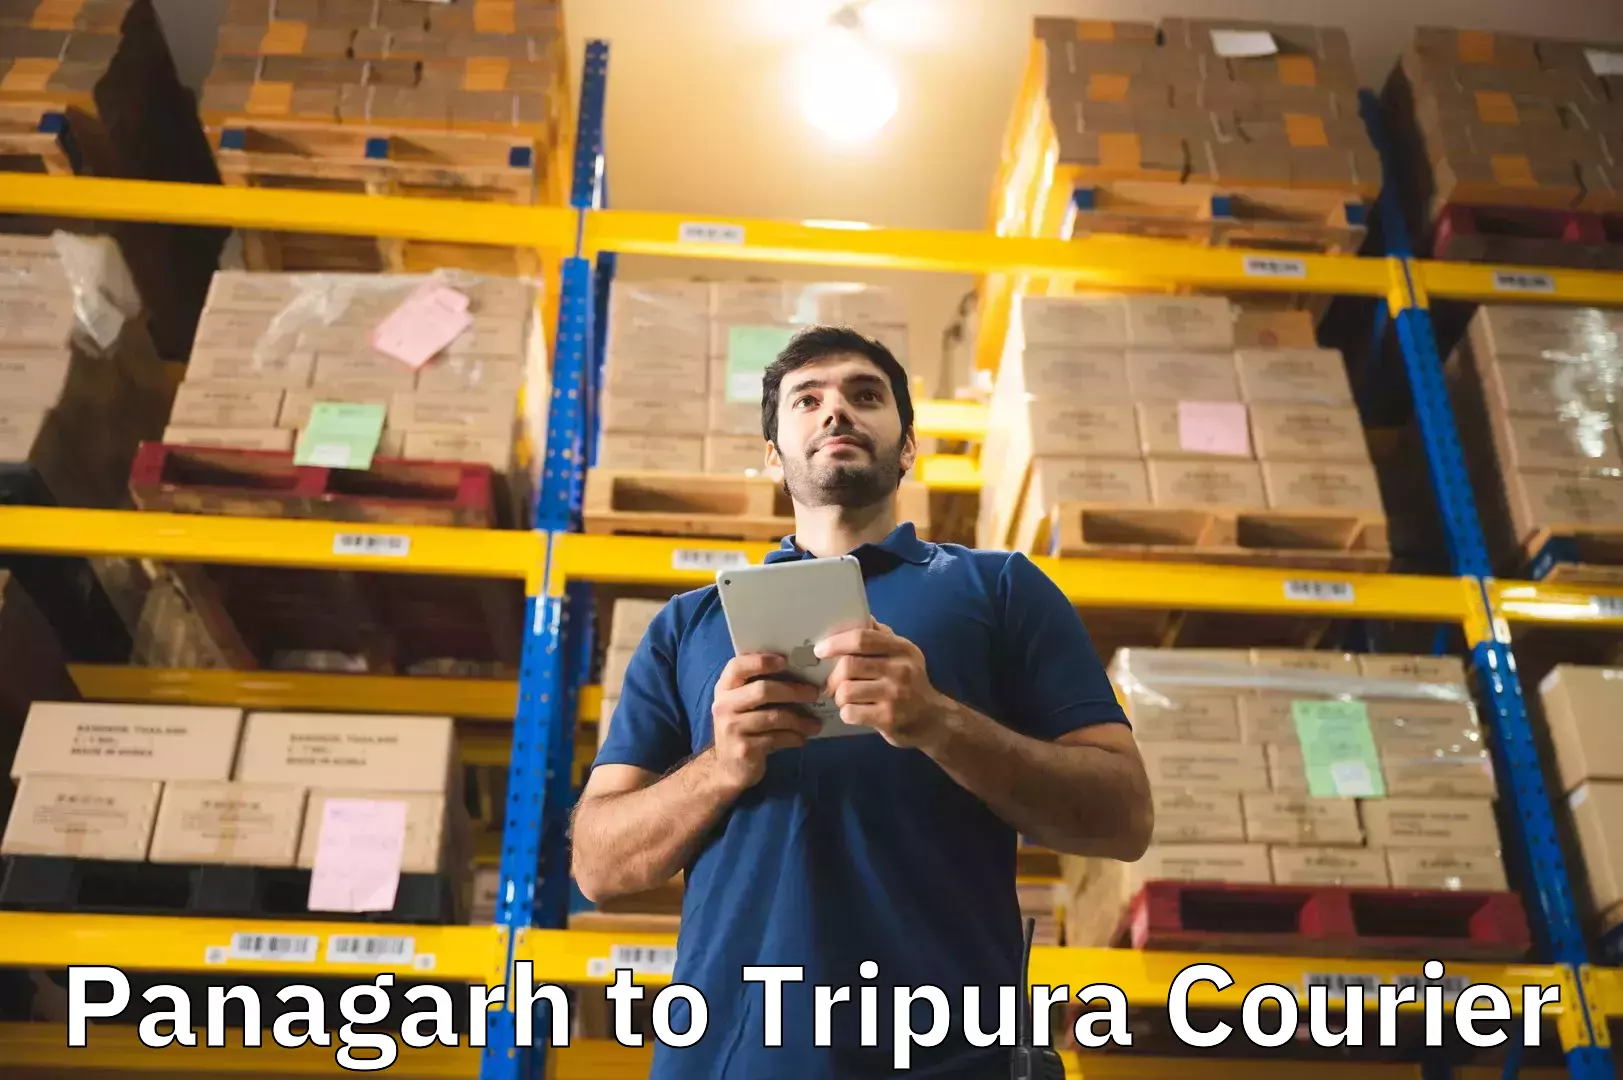 Baggage courier rates calculator Panagarh to Udaipur Tripura